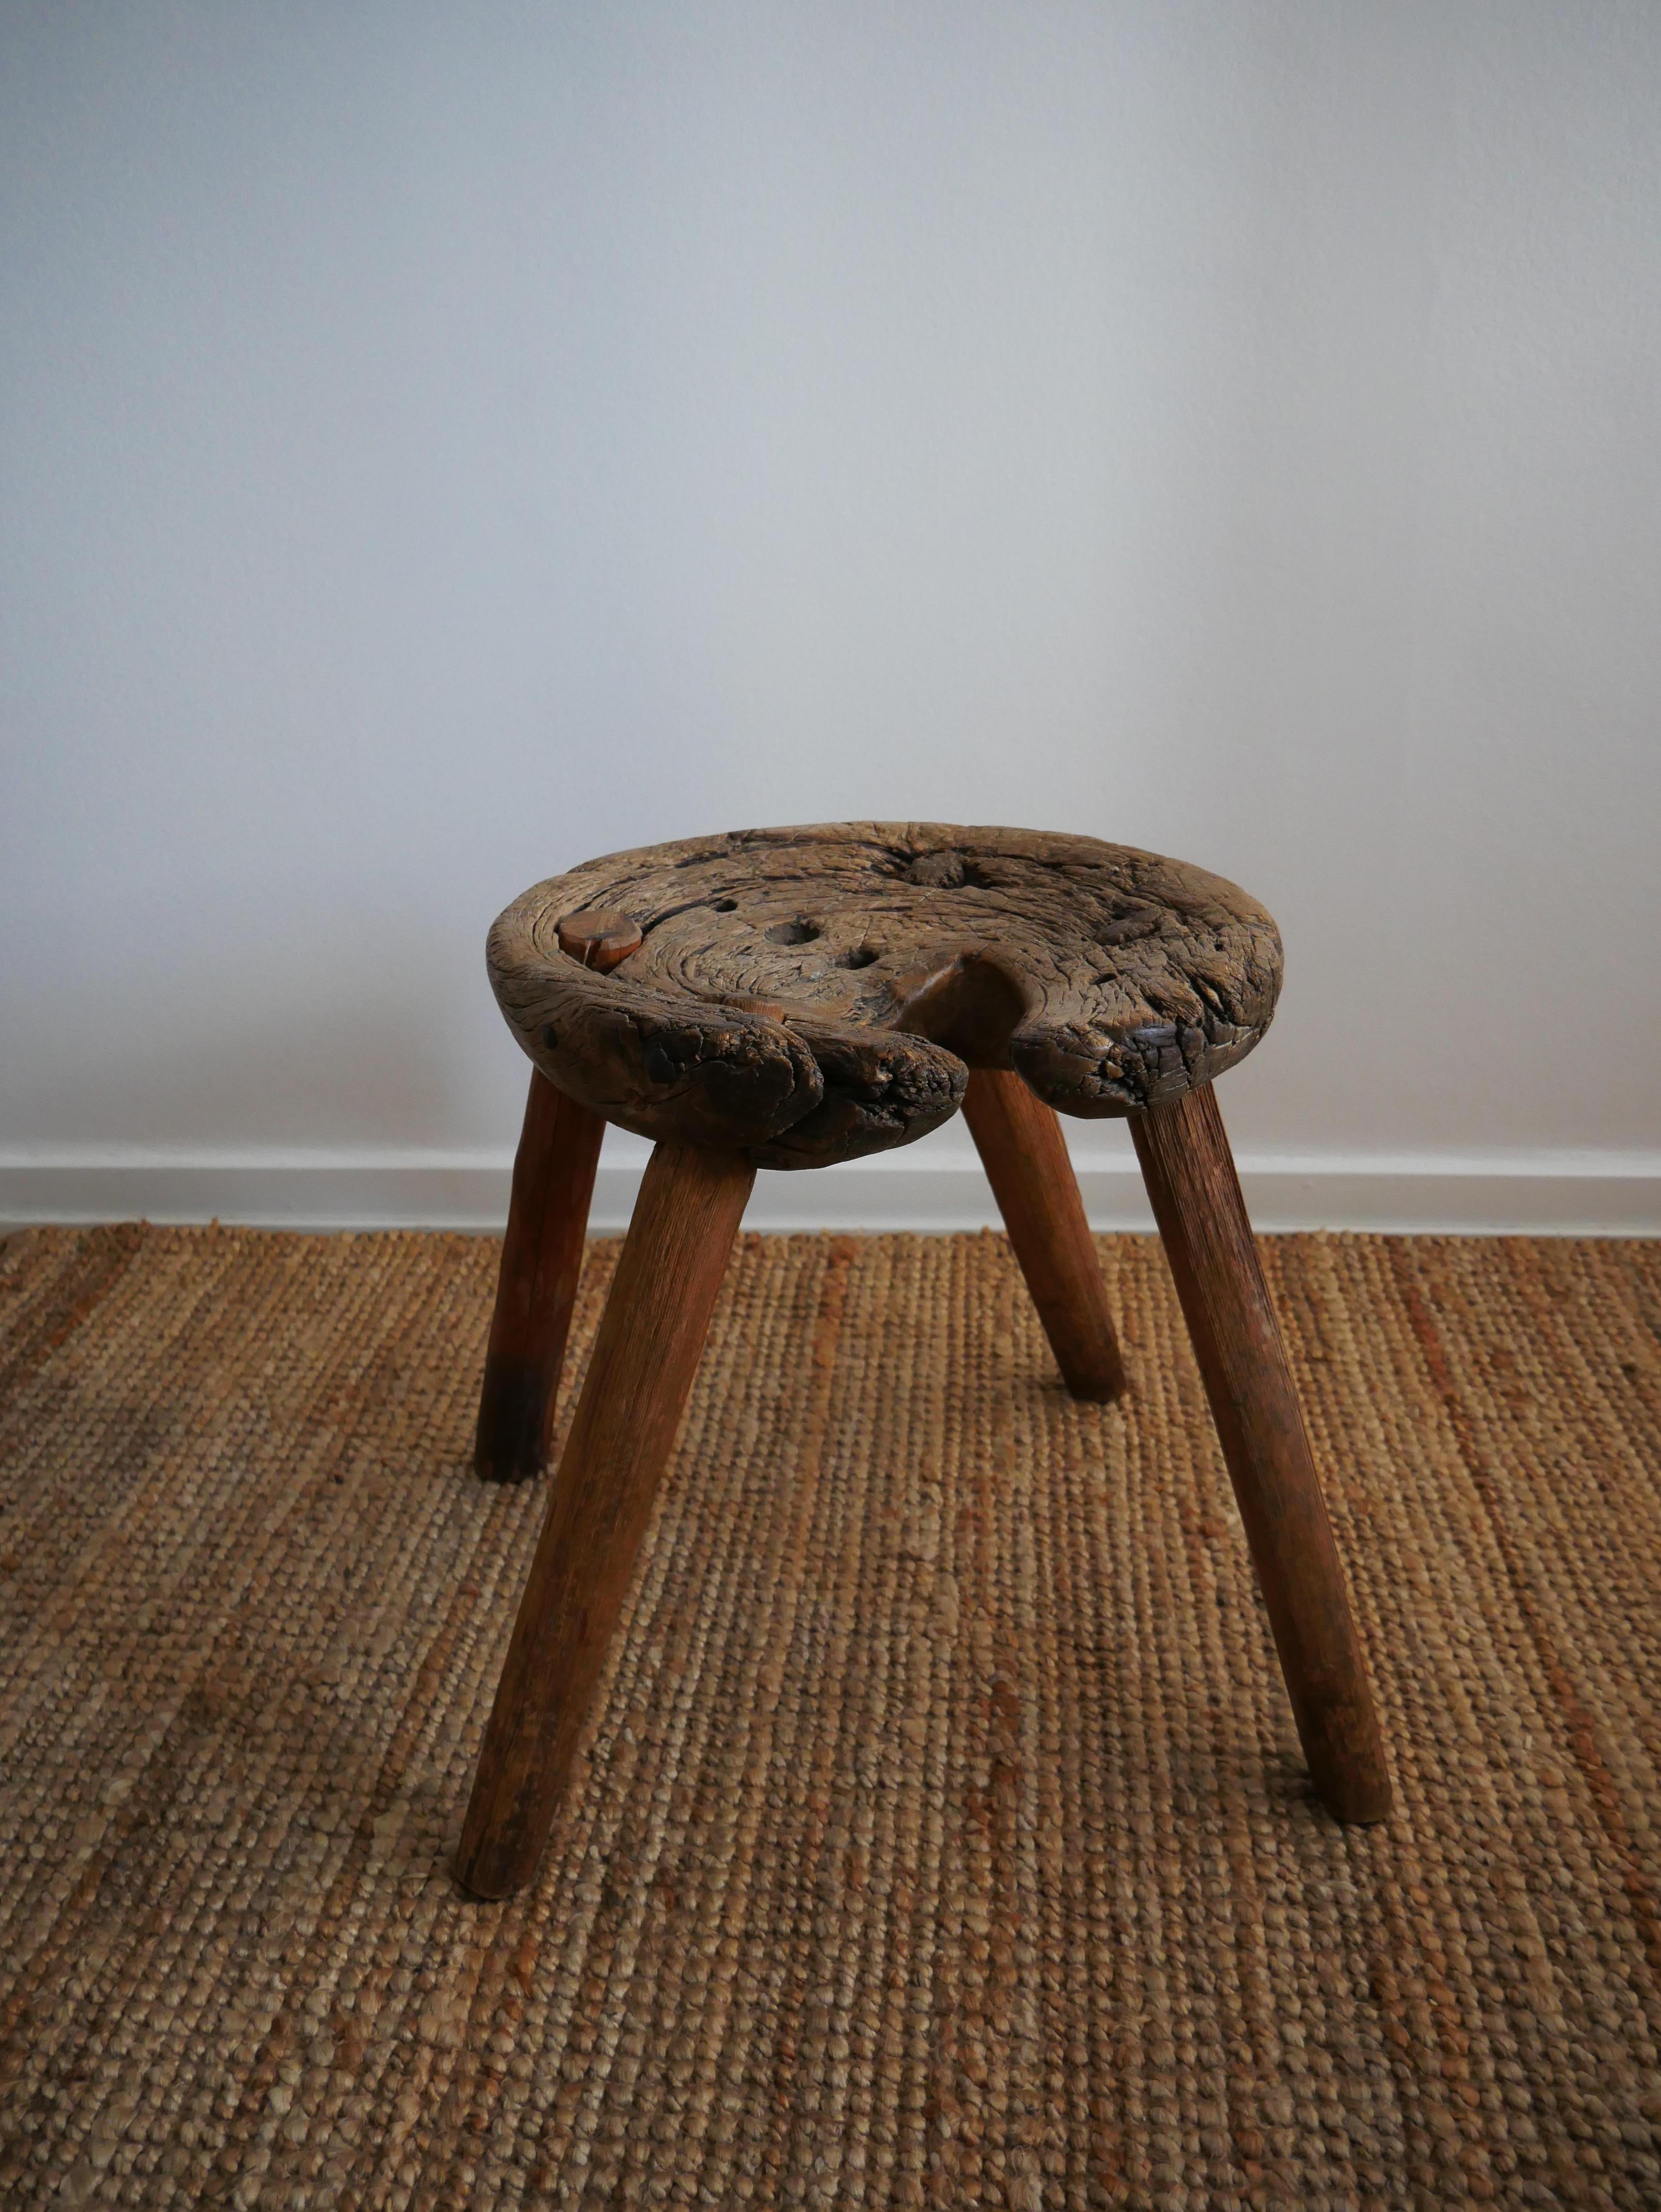 The patina of this Swedish milking stool from 1784 is amazing and truly something out of the ordinary. 
This pine sculptural wabi-sabi milking stool whit its organic form, has specifically been chosen in the woods for its shape and size.
Through